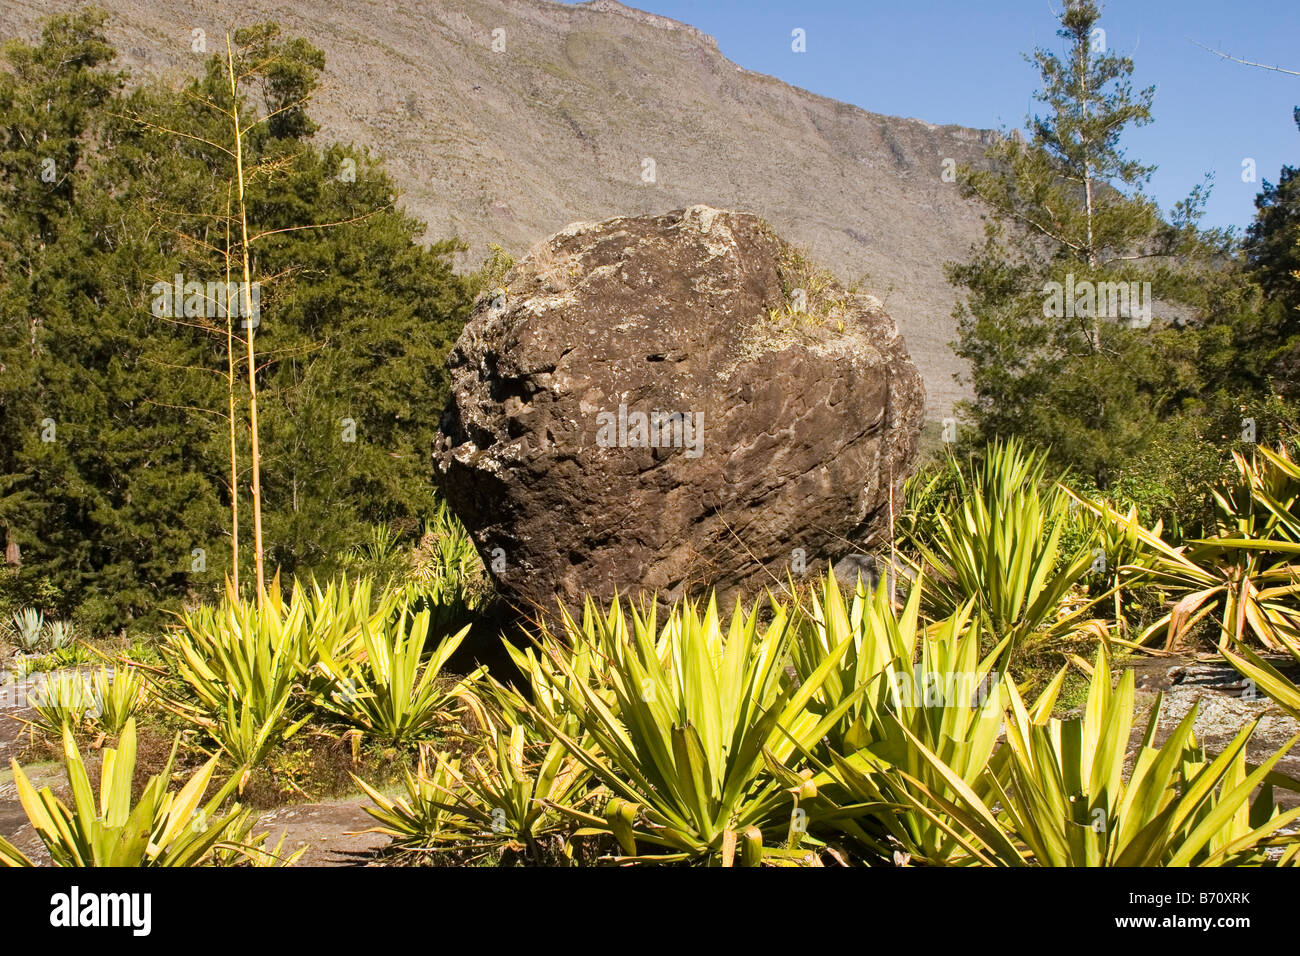 A sphere-shaped volcanic boulder at the base of la Cirque de Mafate on the Island of Reunion in the Indian Ocean. Stock Photo